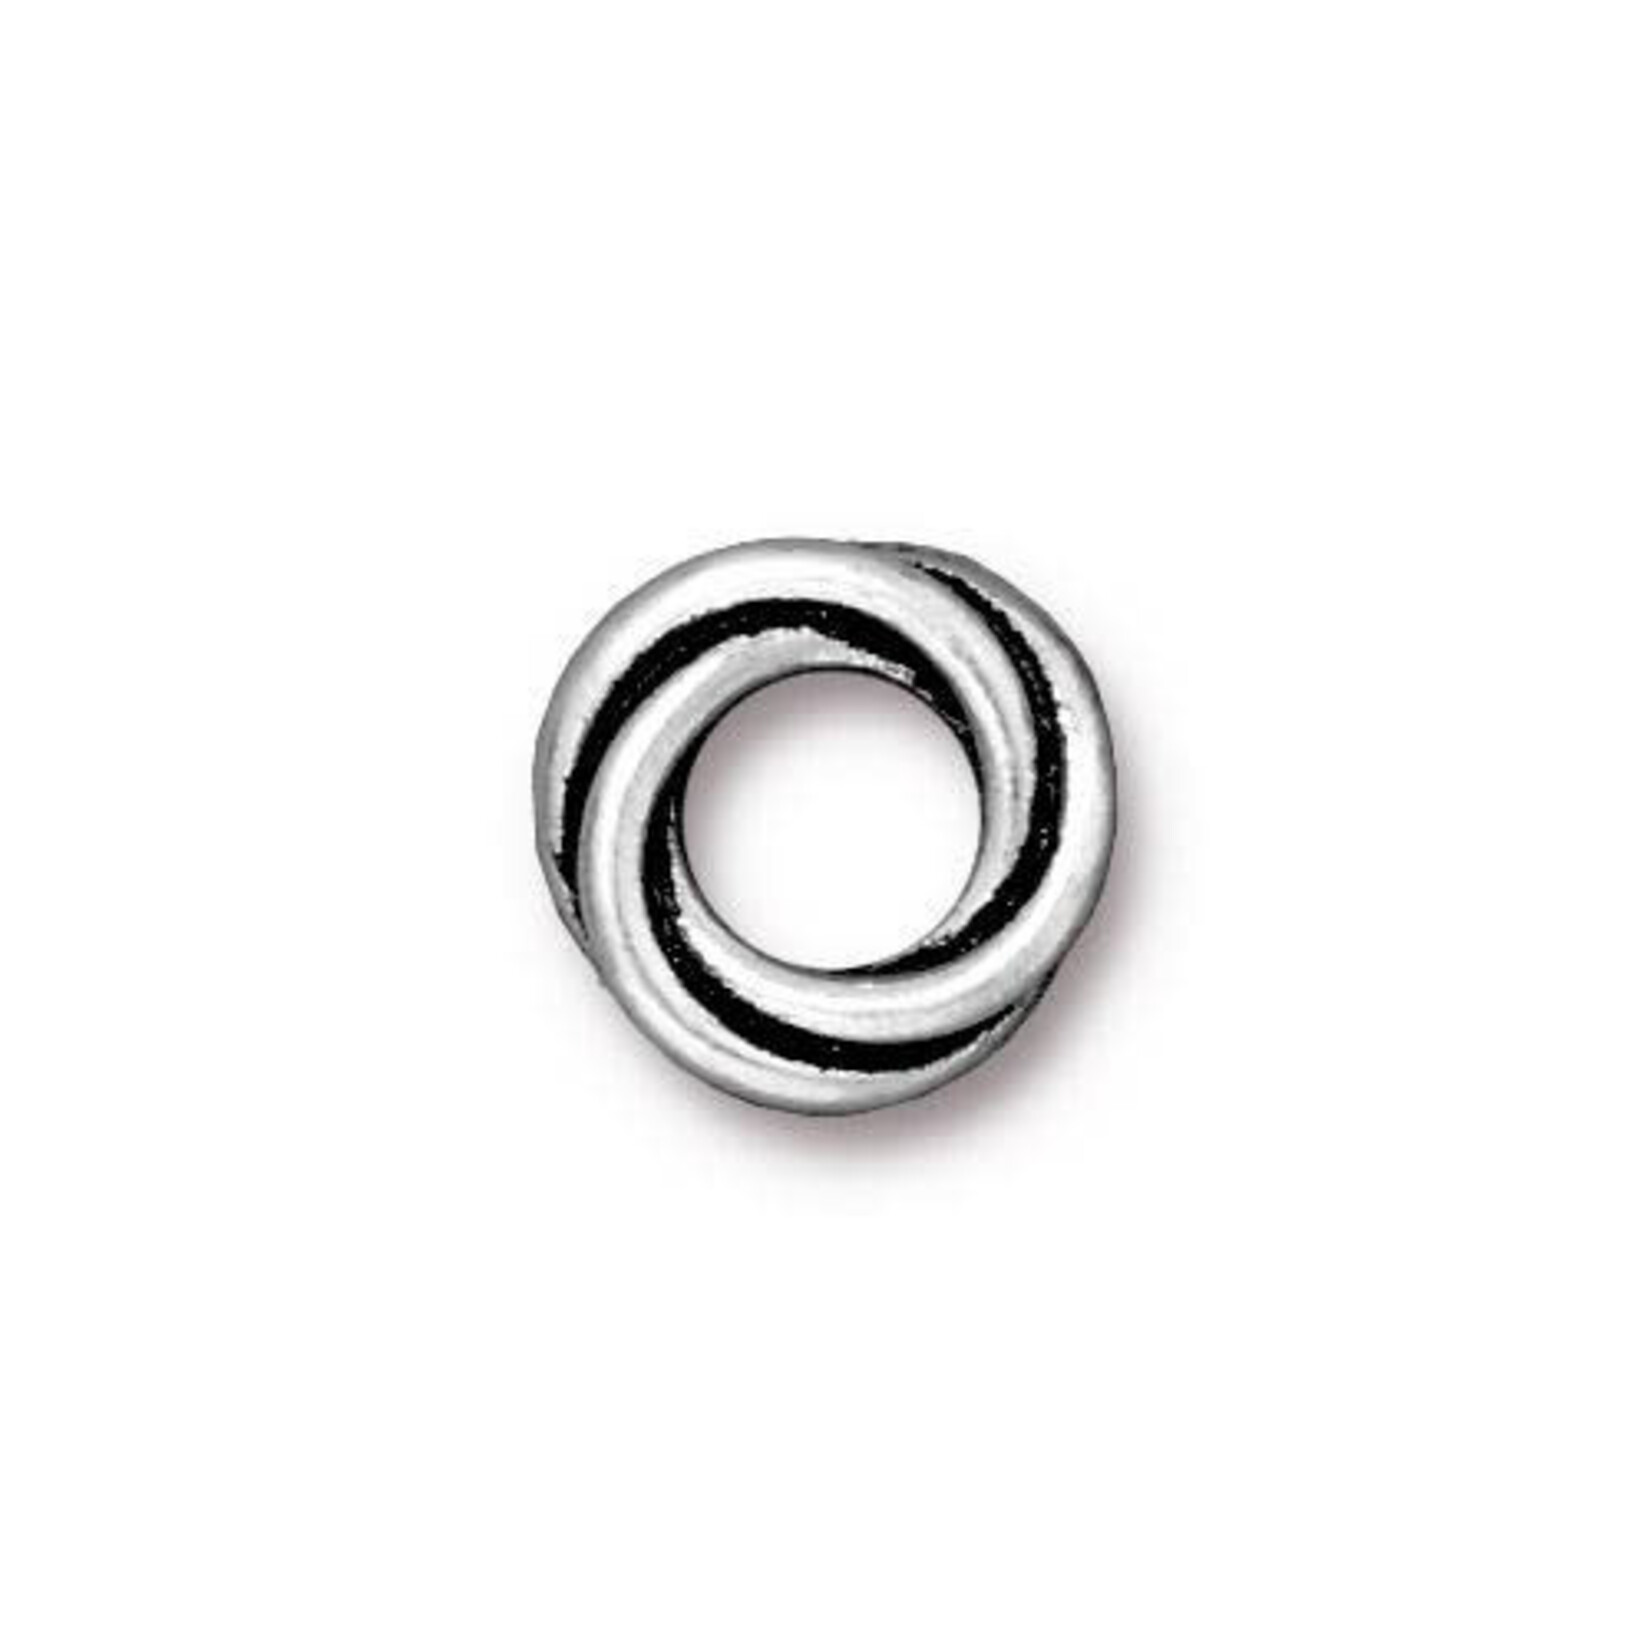 TierraCast Twisted 12mm Spacer Love Knot - Antique Silver Plated